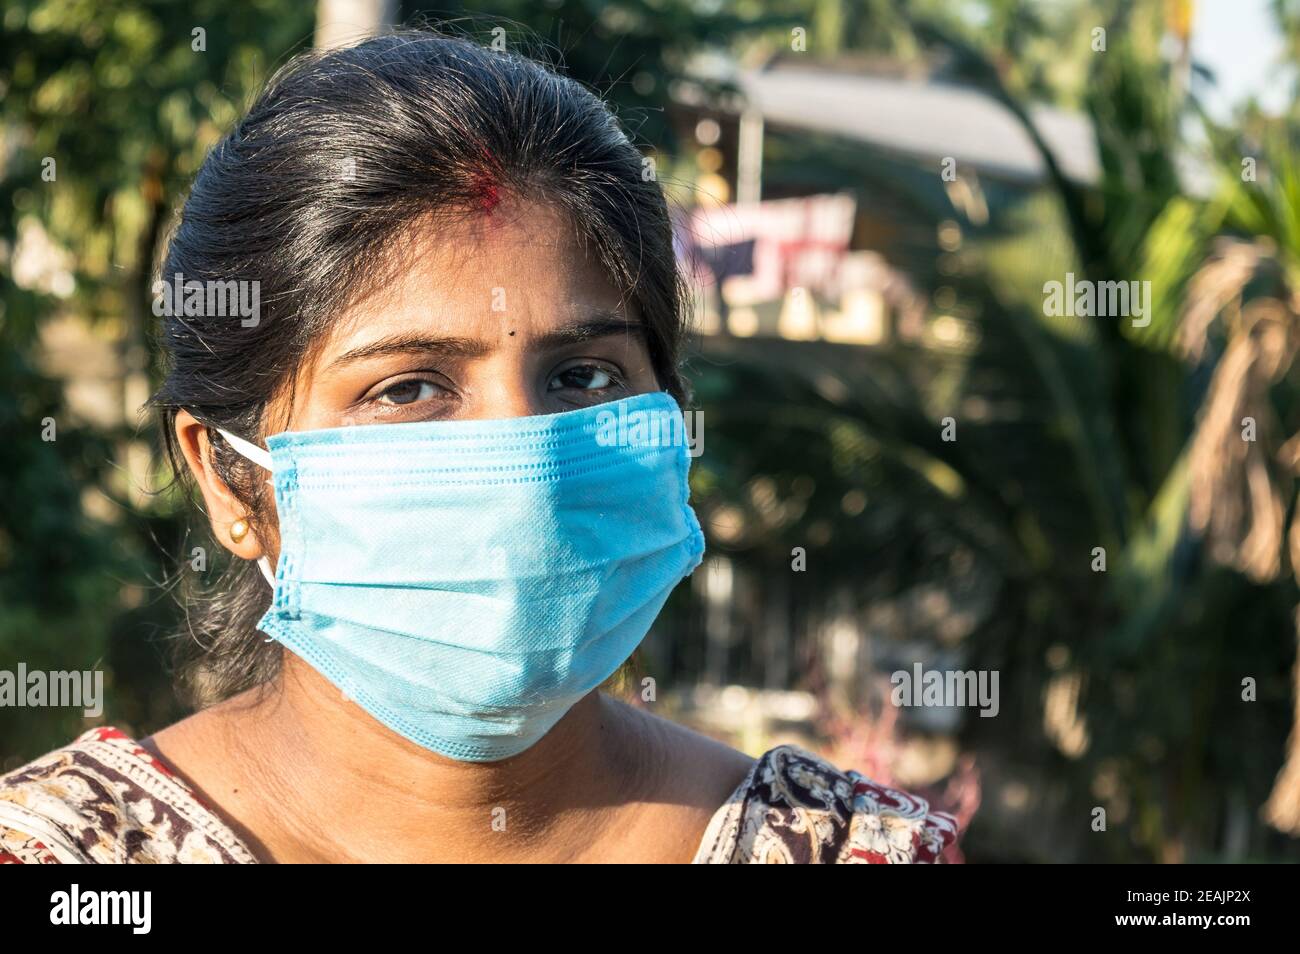 Smiling face wearing mask. Woman smiling wearing a face mask. Close up Front view of a happy Indian woman wearing a face mask smiling and looking at camera. Healthcare medicine background India. Stock Photo